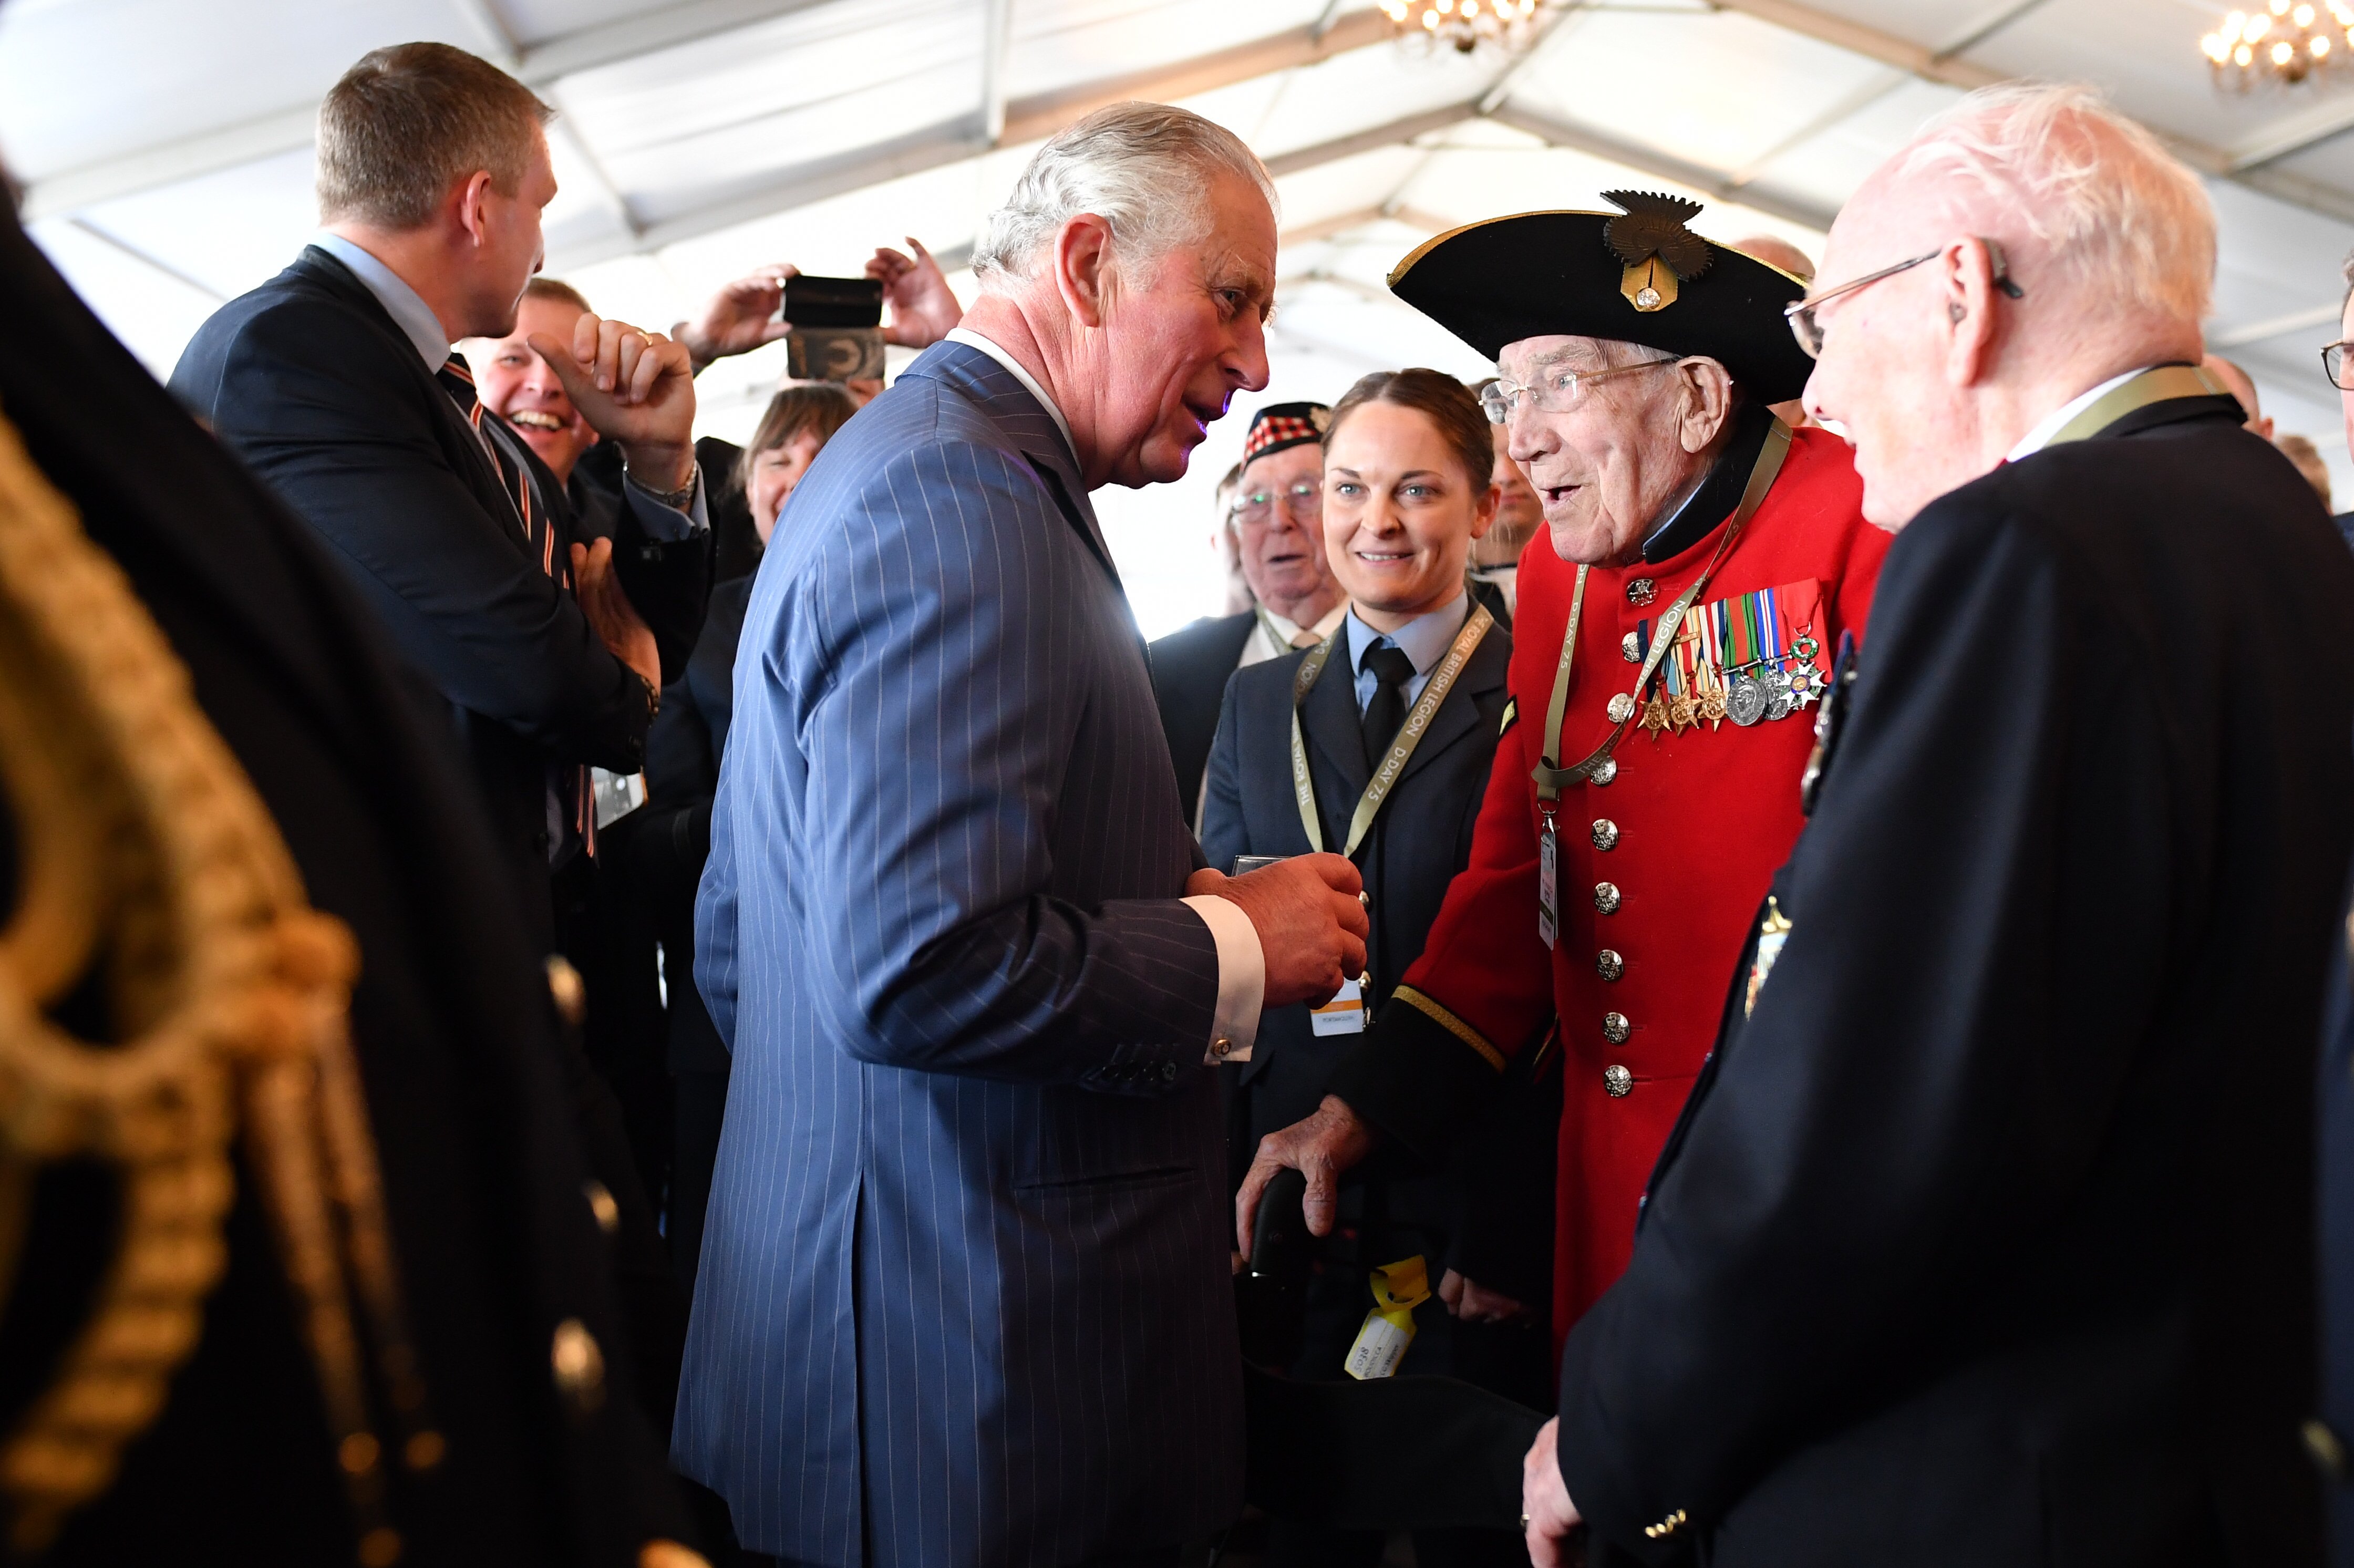 Prince Charles meeting veterans during the D-day 75 Commemorations in Portsmouth, England | Photo: Getty Images